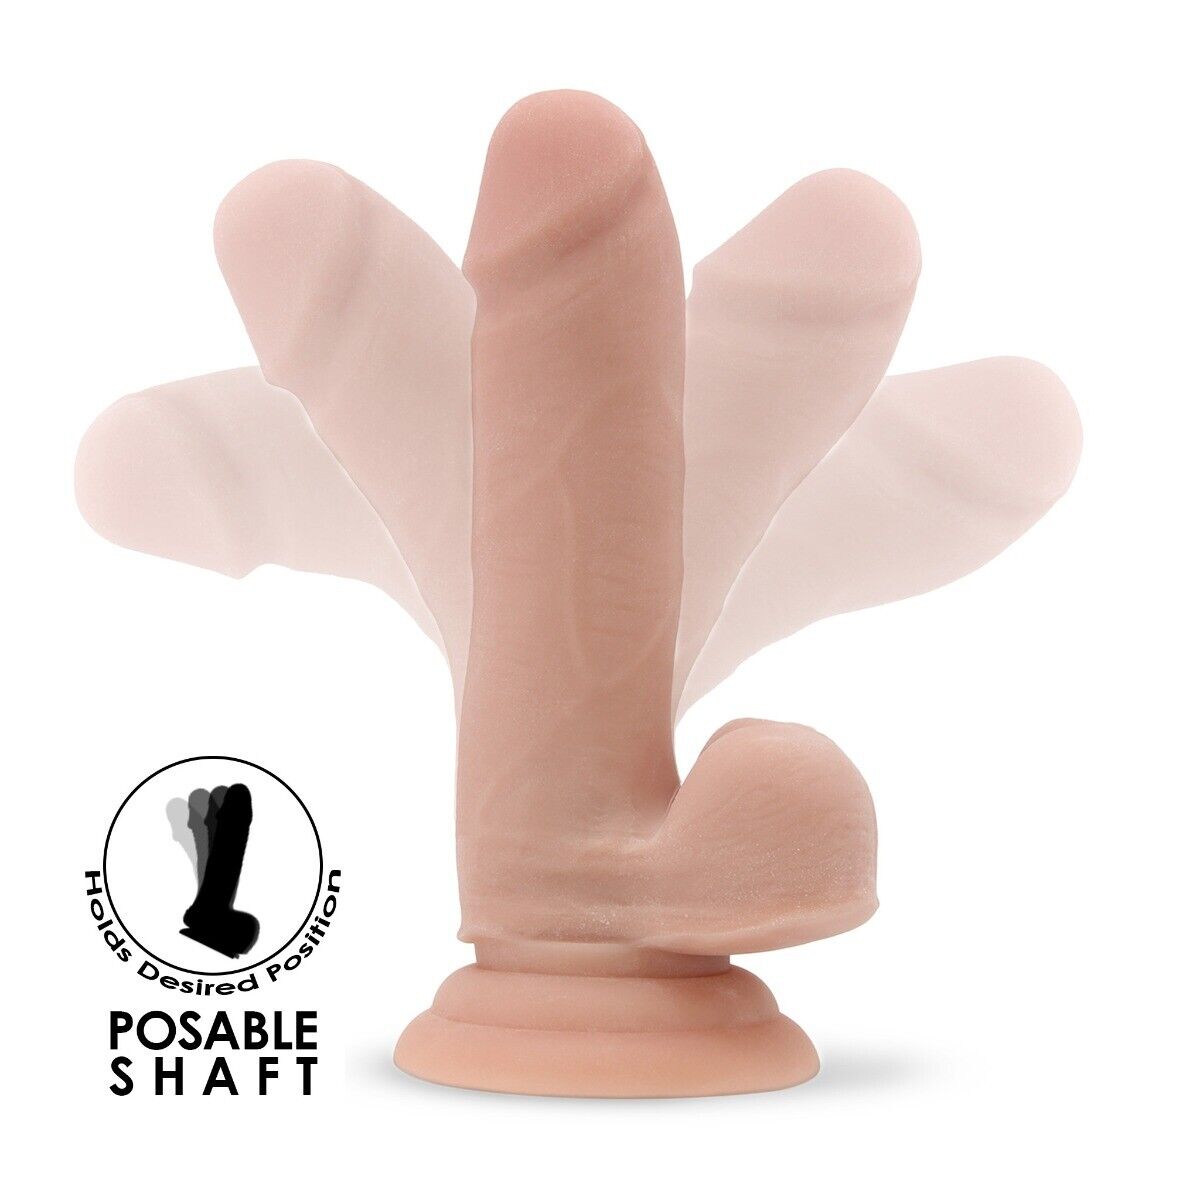 5.5" Beginner Realistic Ultra Soft Posable Cock and Balls Dildo Dong Suction Cup